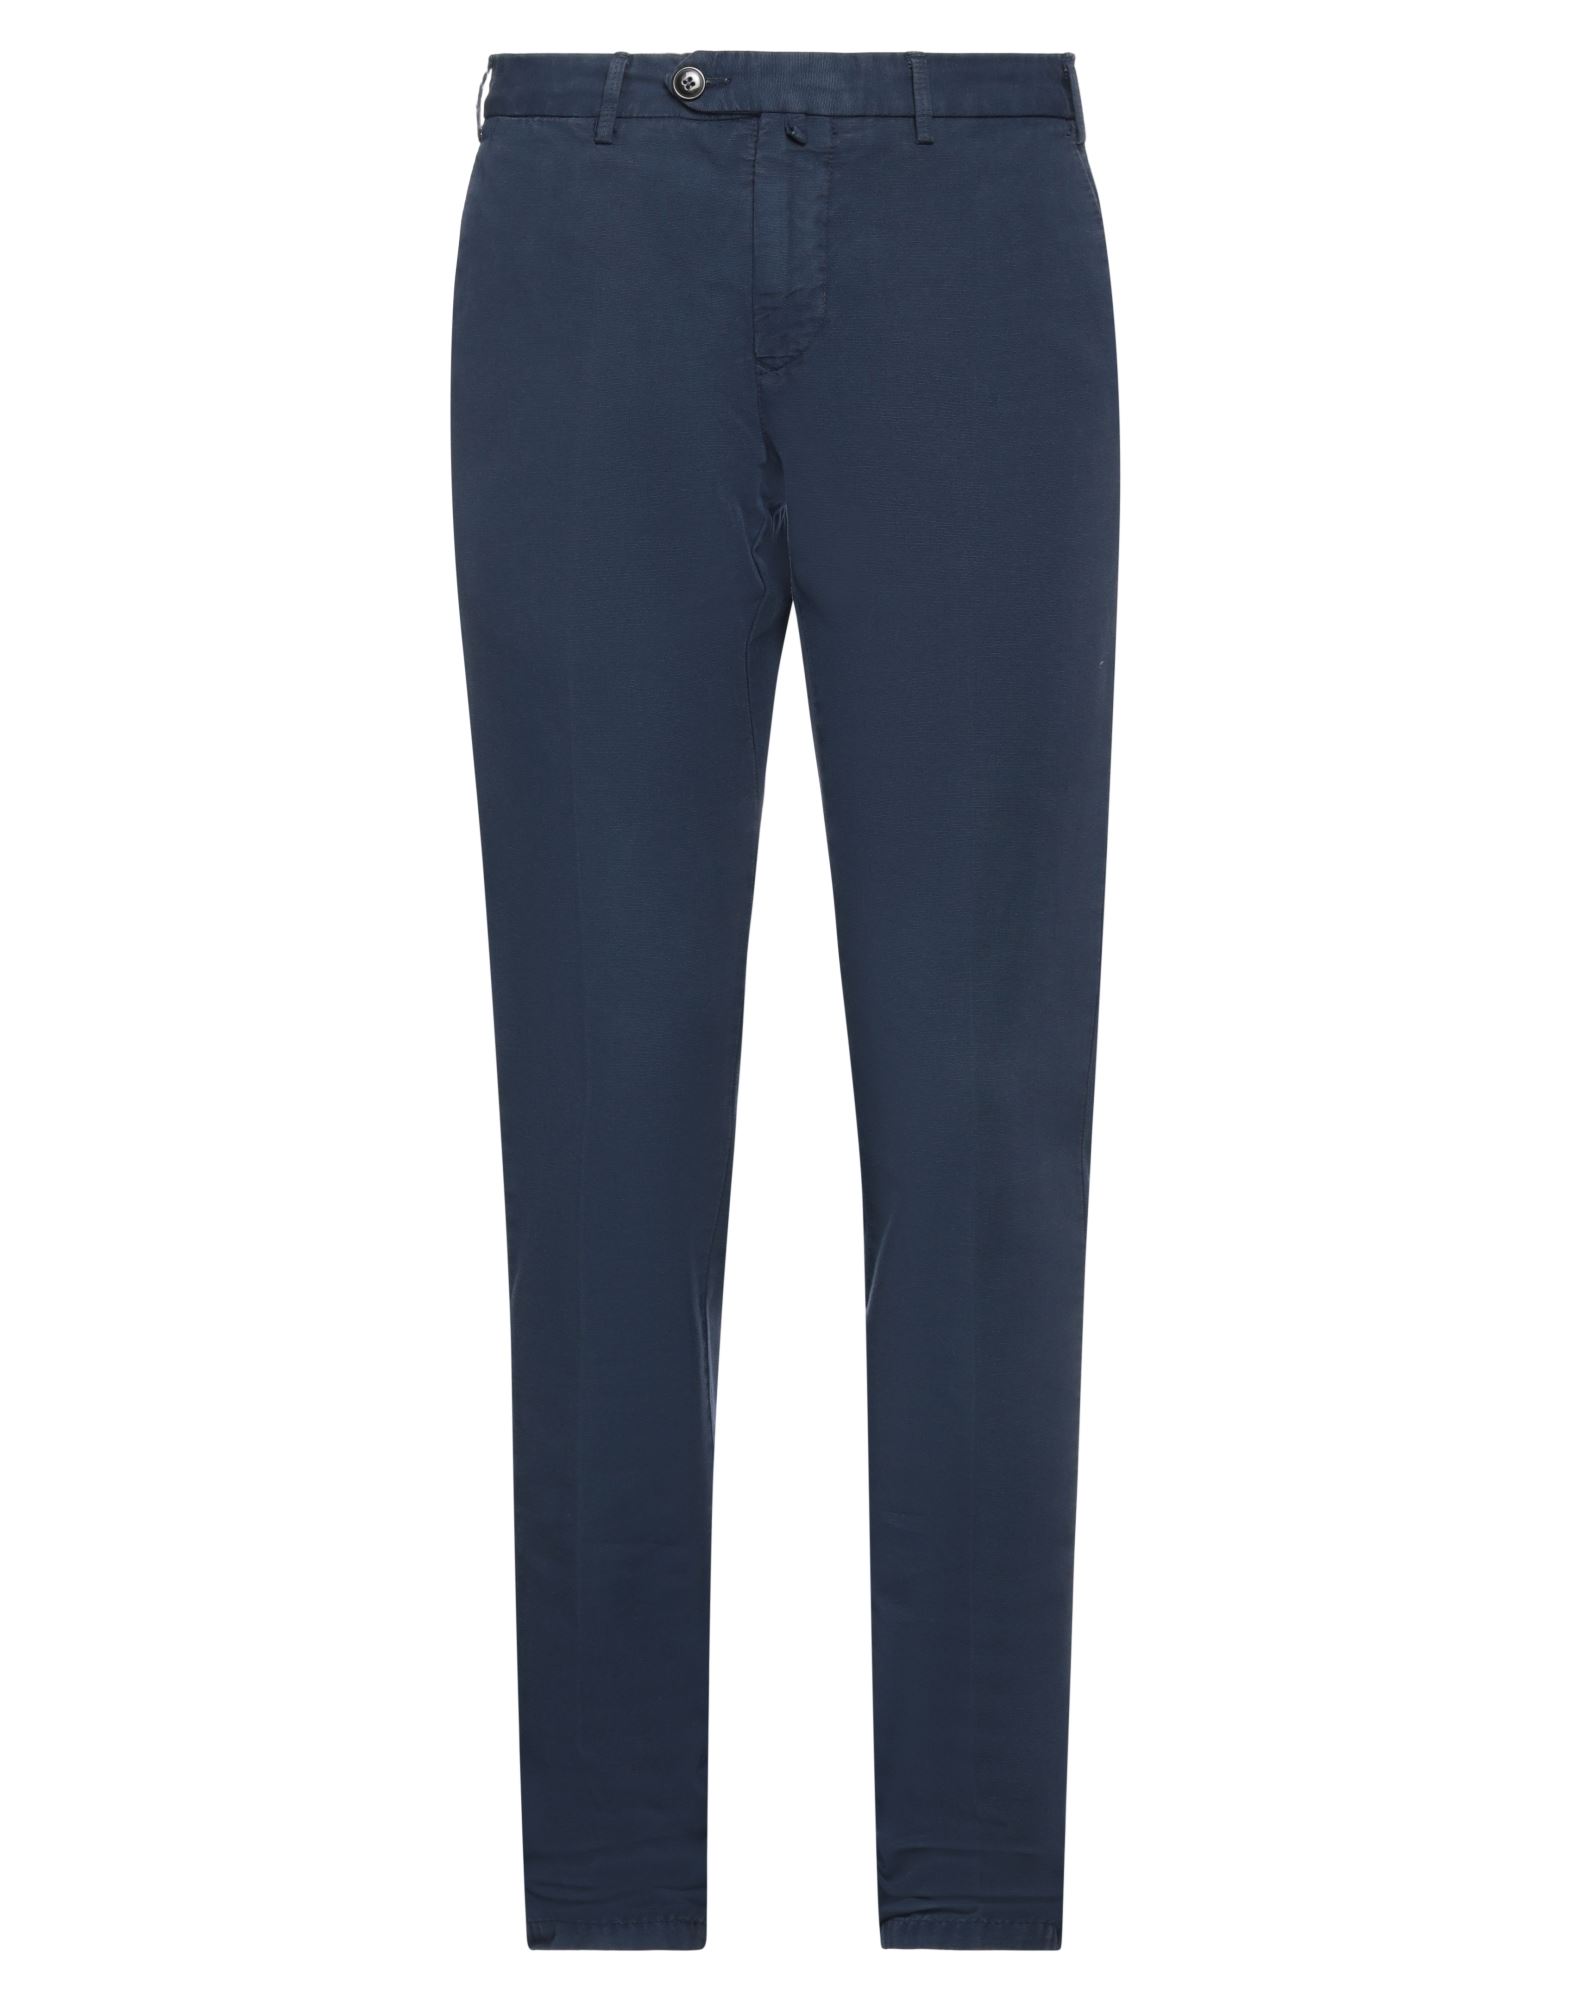 Addiction Pants In Navy Blue